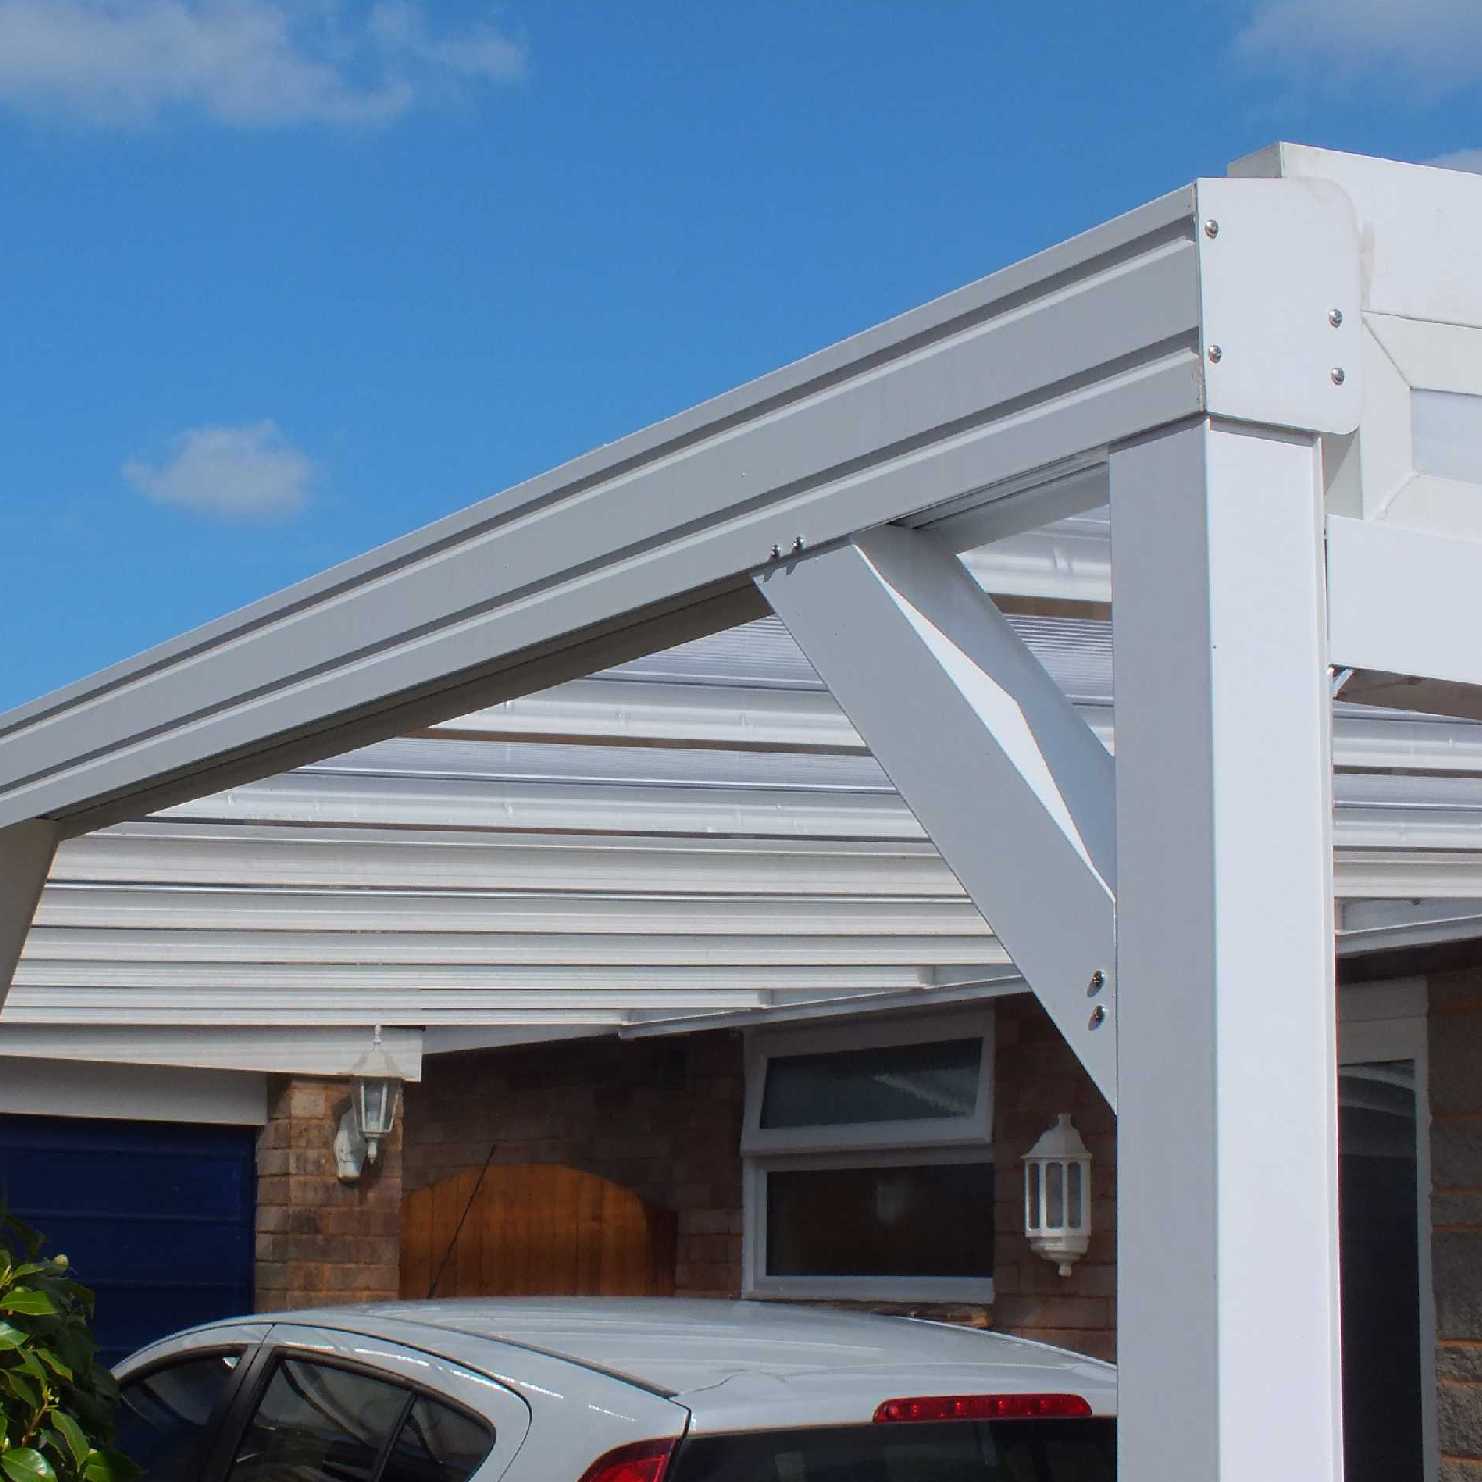 Great deals on Omega Smart Lean-To Canopy, White with 16mm Polycarbonate Glazing - 6.0m (W) x 1.5m (P), (3) Supporting Posts